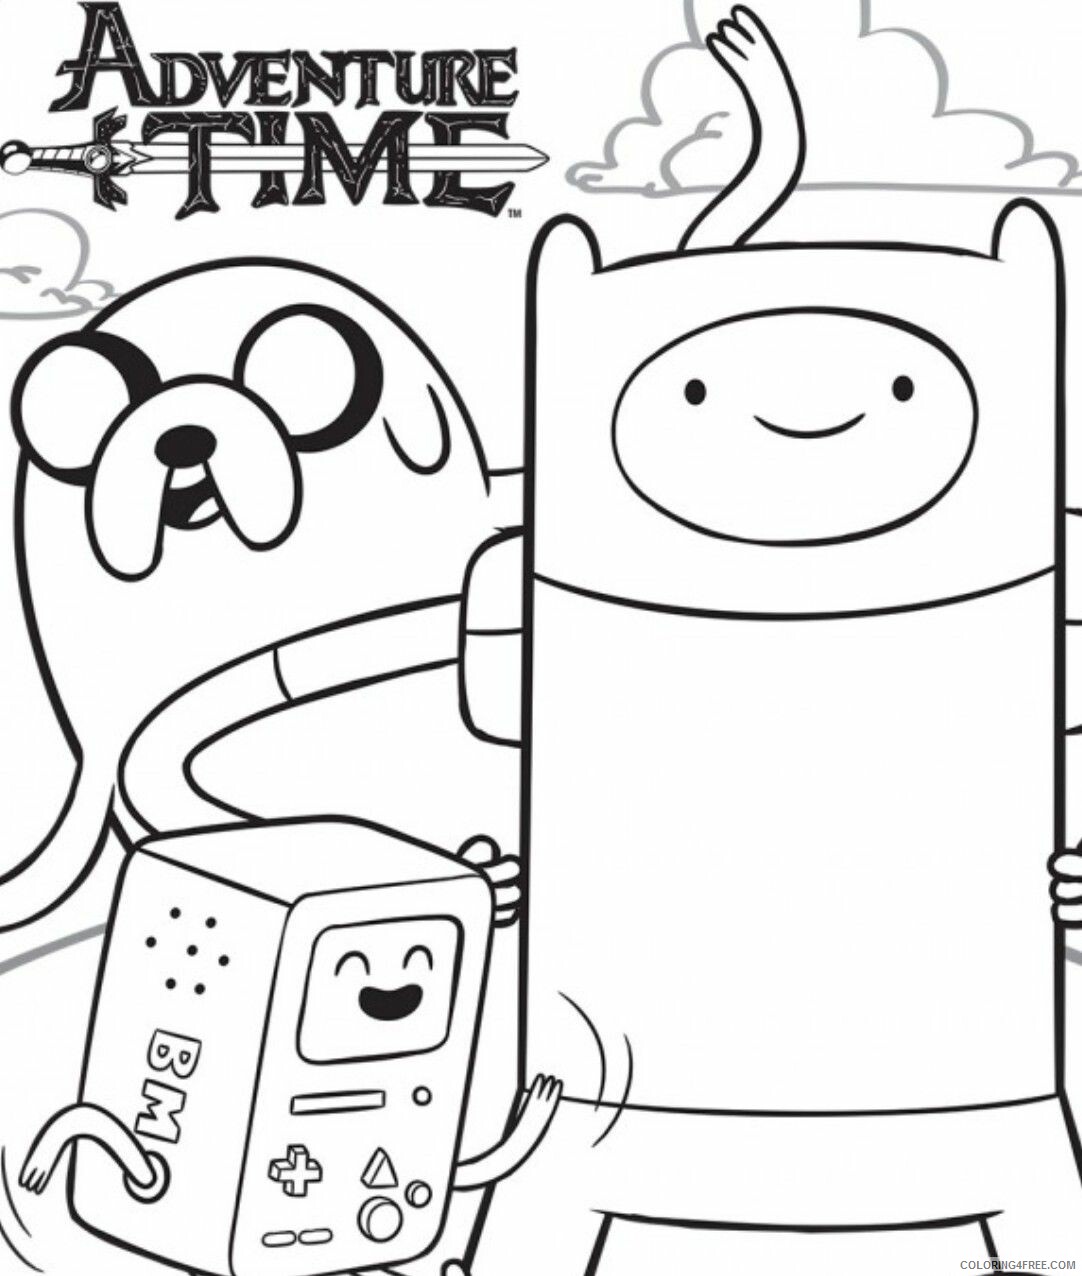 Adventure Time Coloring Pages Online Printable Sheets adventure time Only 2021 a 2643 Coloring4free